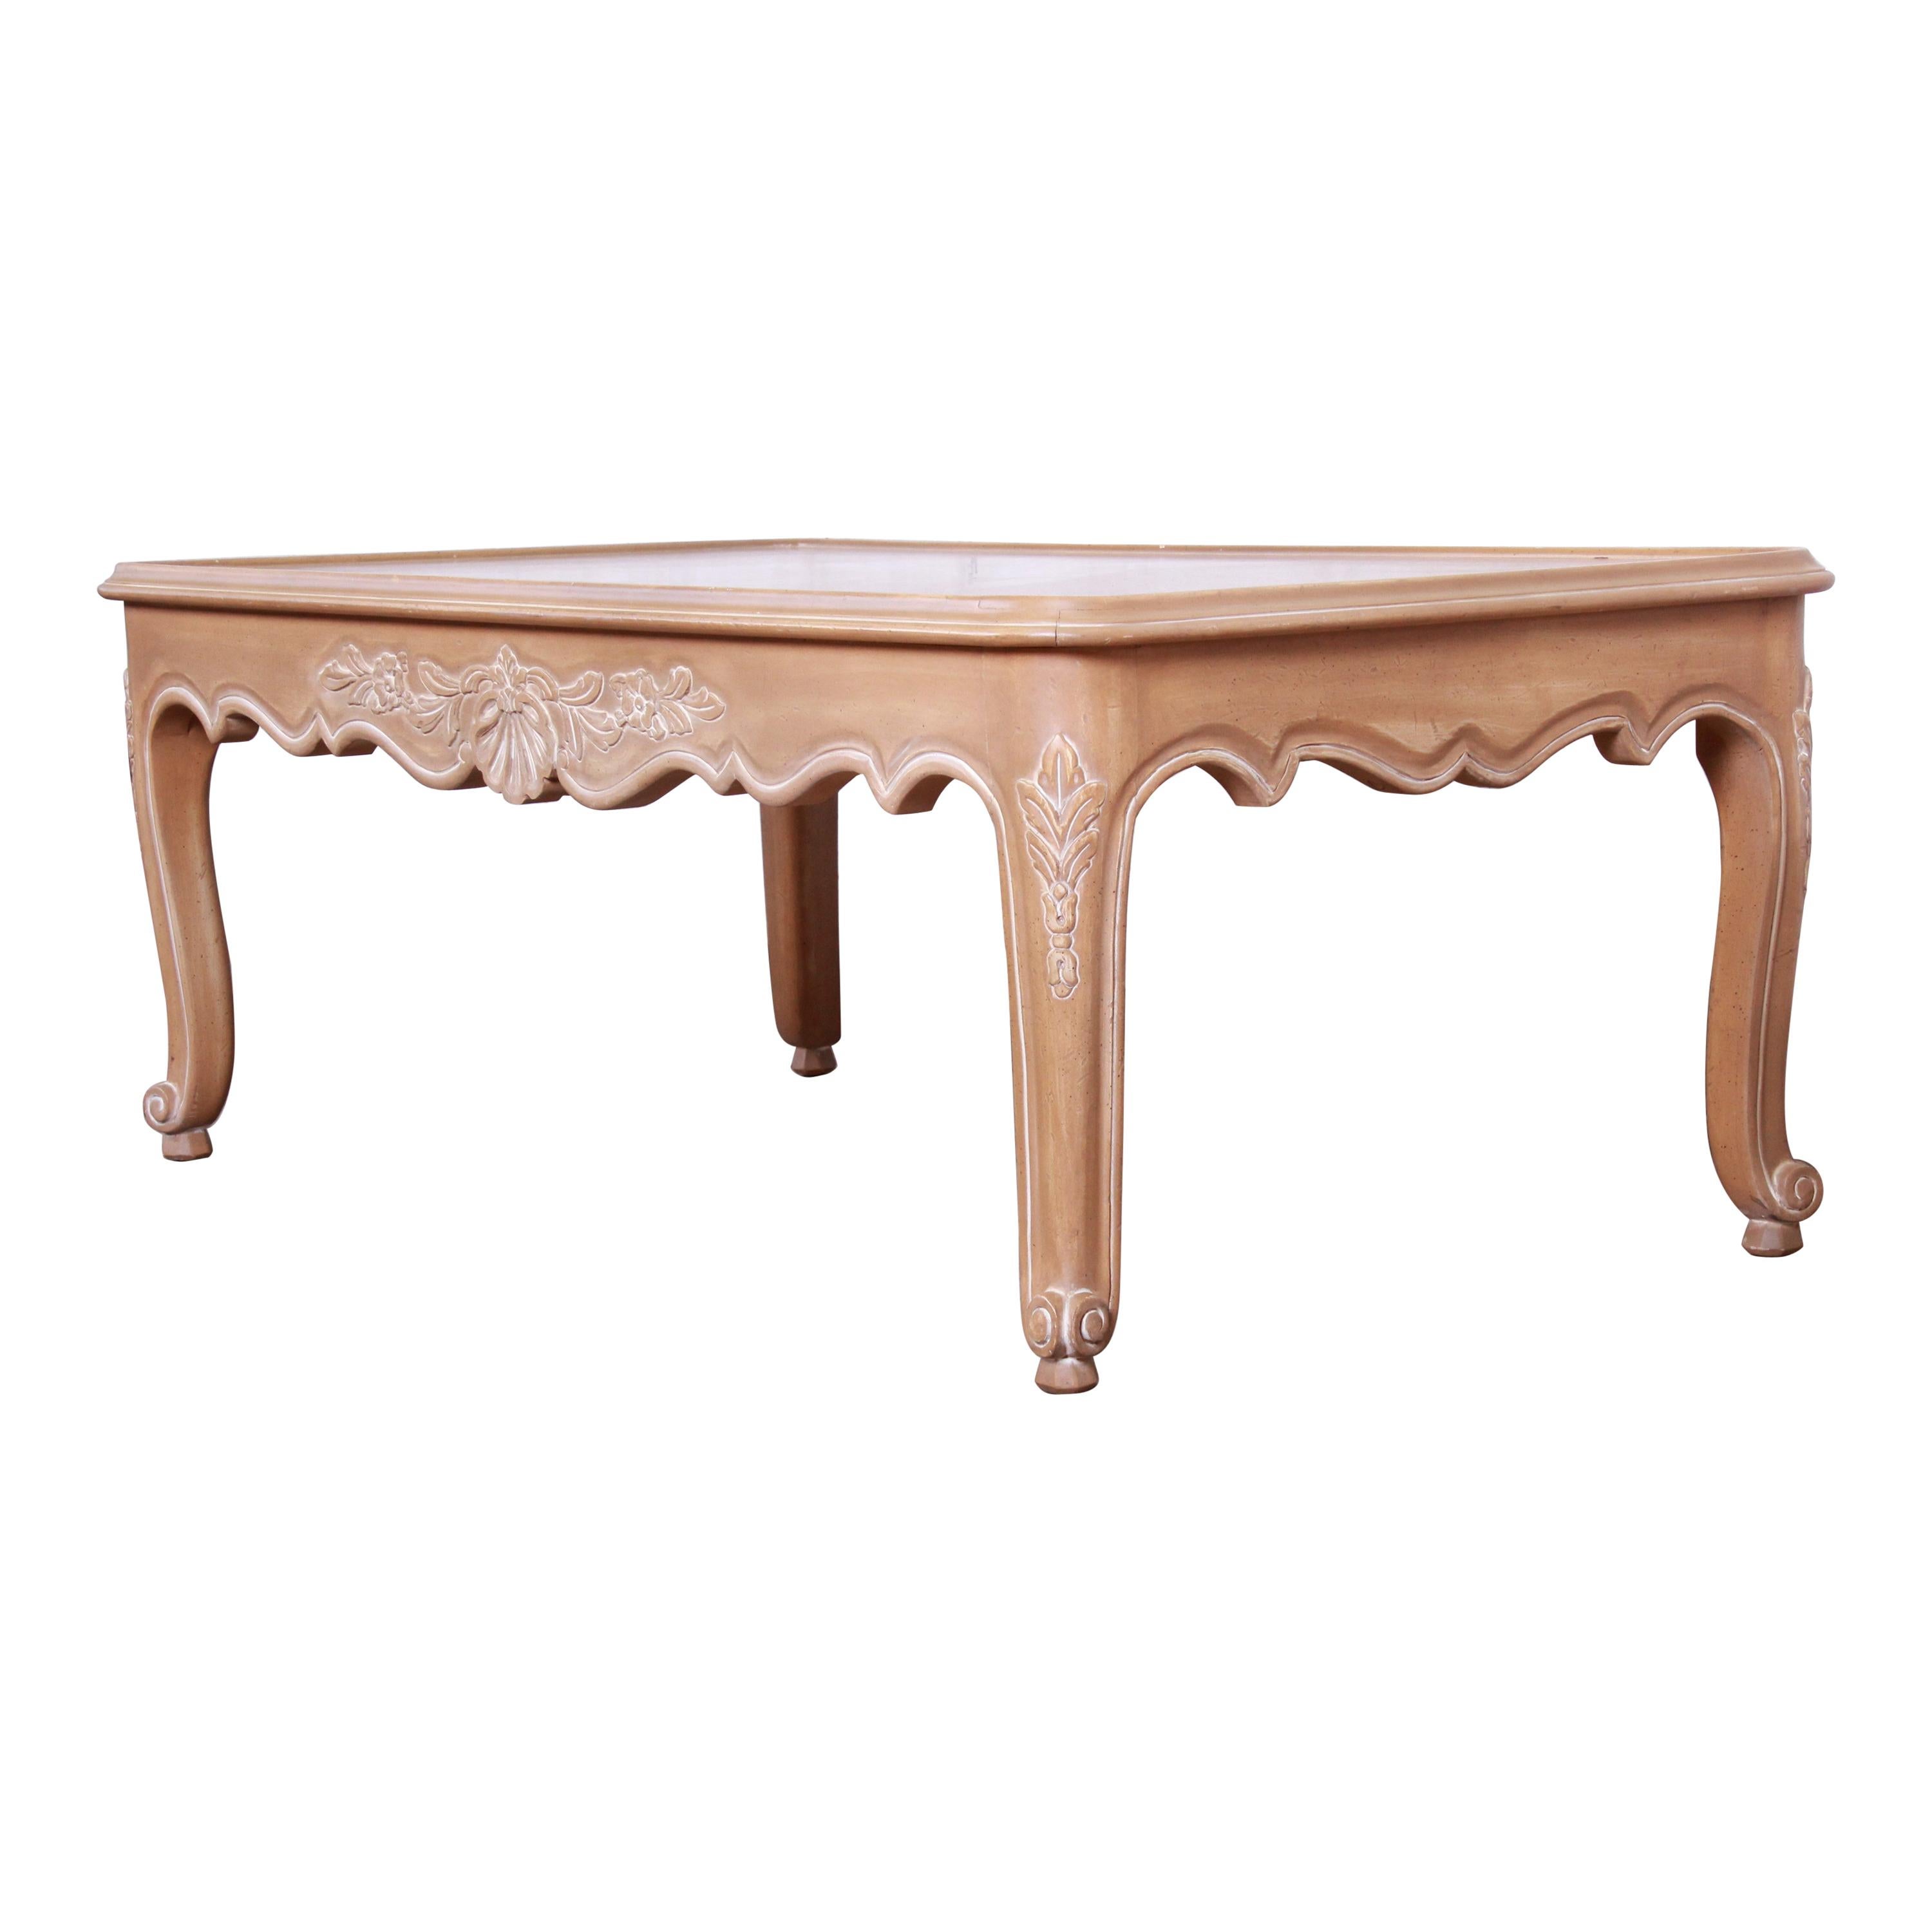 Kindel Furniture Carved French Provincial Louis XV Style Coffee Table